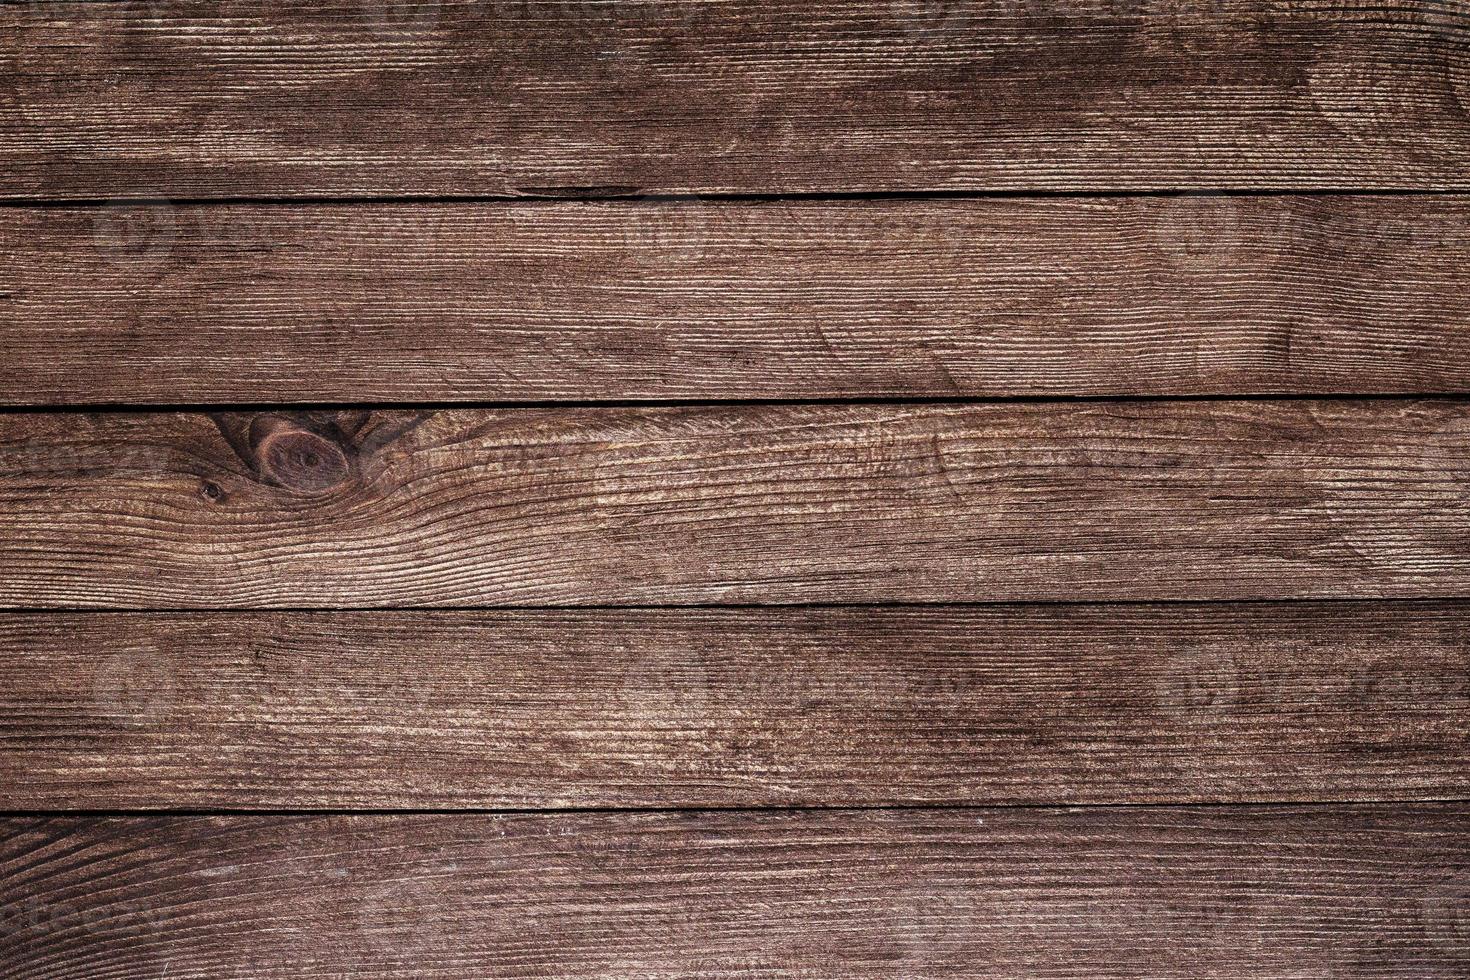 Vintage brown wood background texture with knots and nail holes. Old painted wood wall. Brown abstract background. Vintage wooden dark horizontal boards. Front view with copy space photo